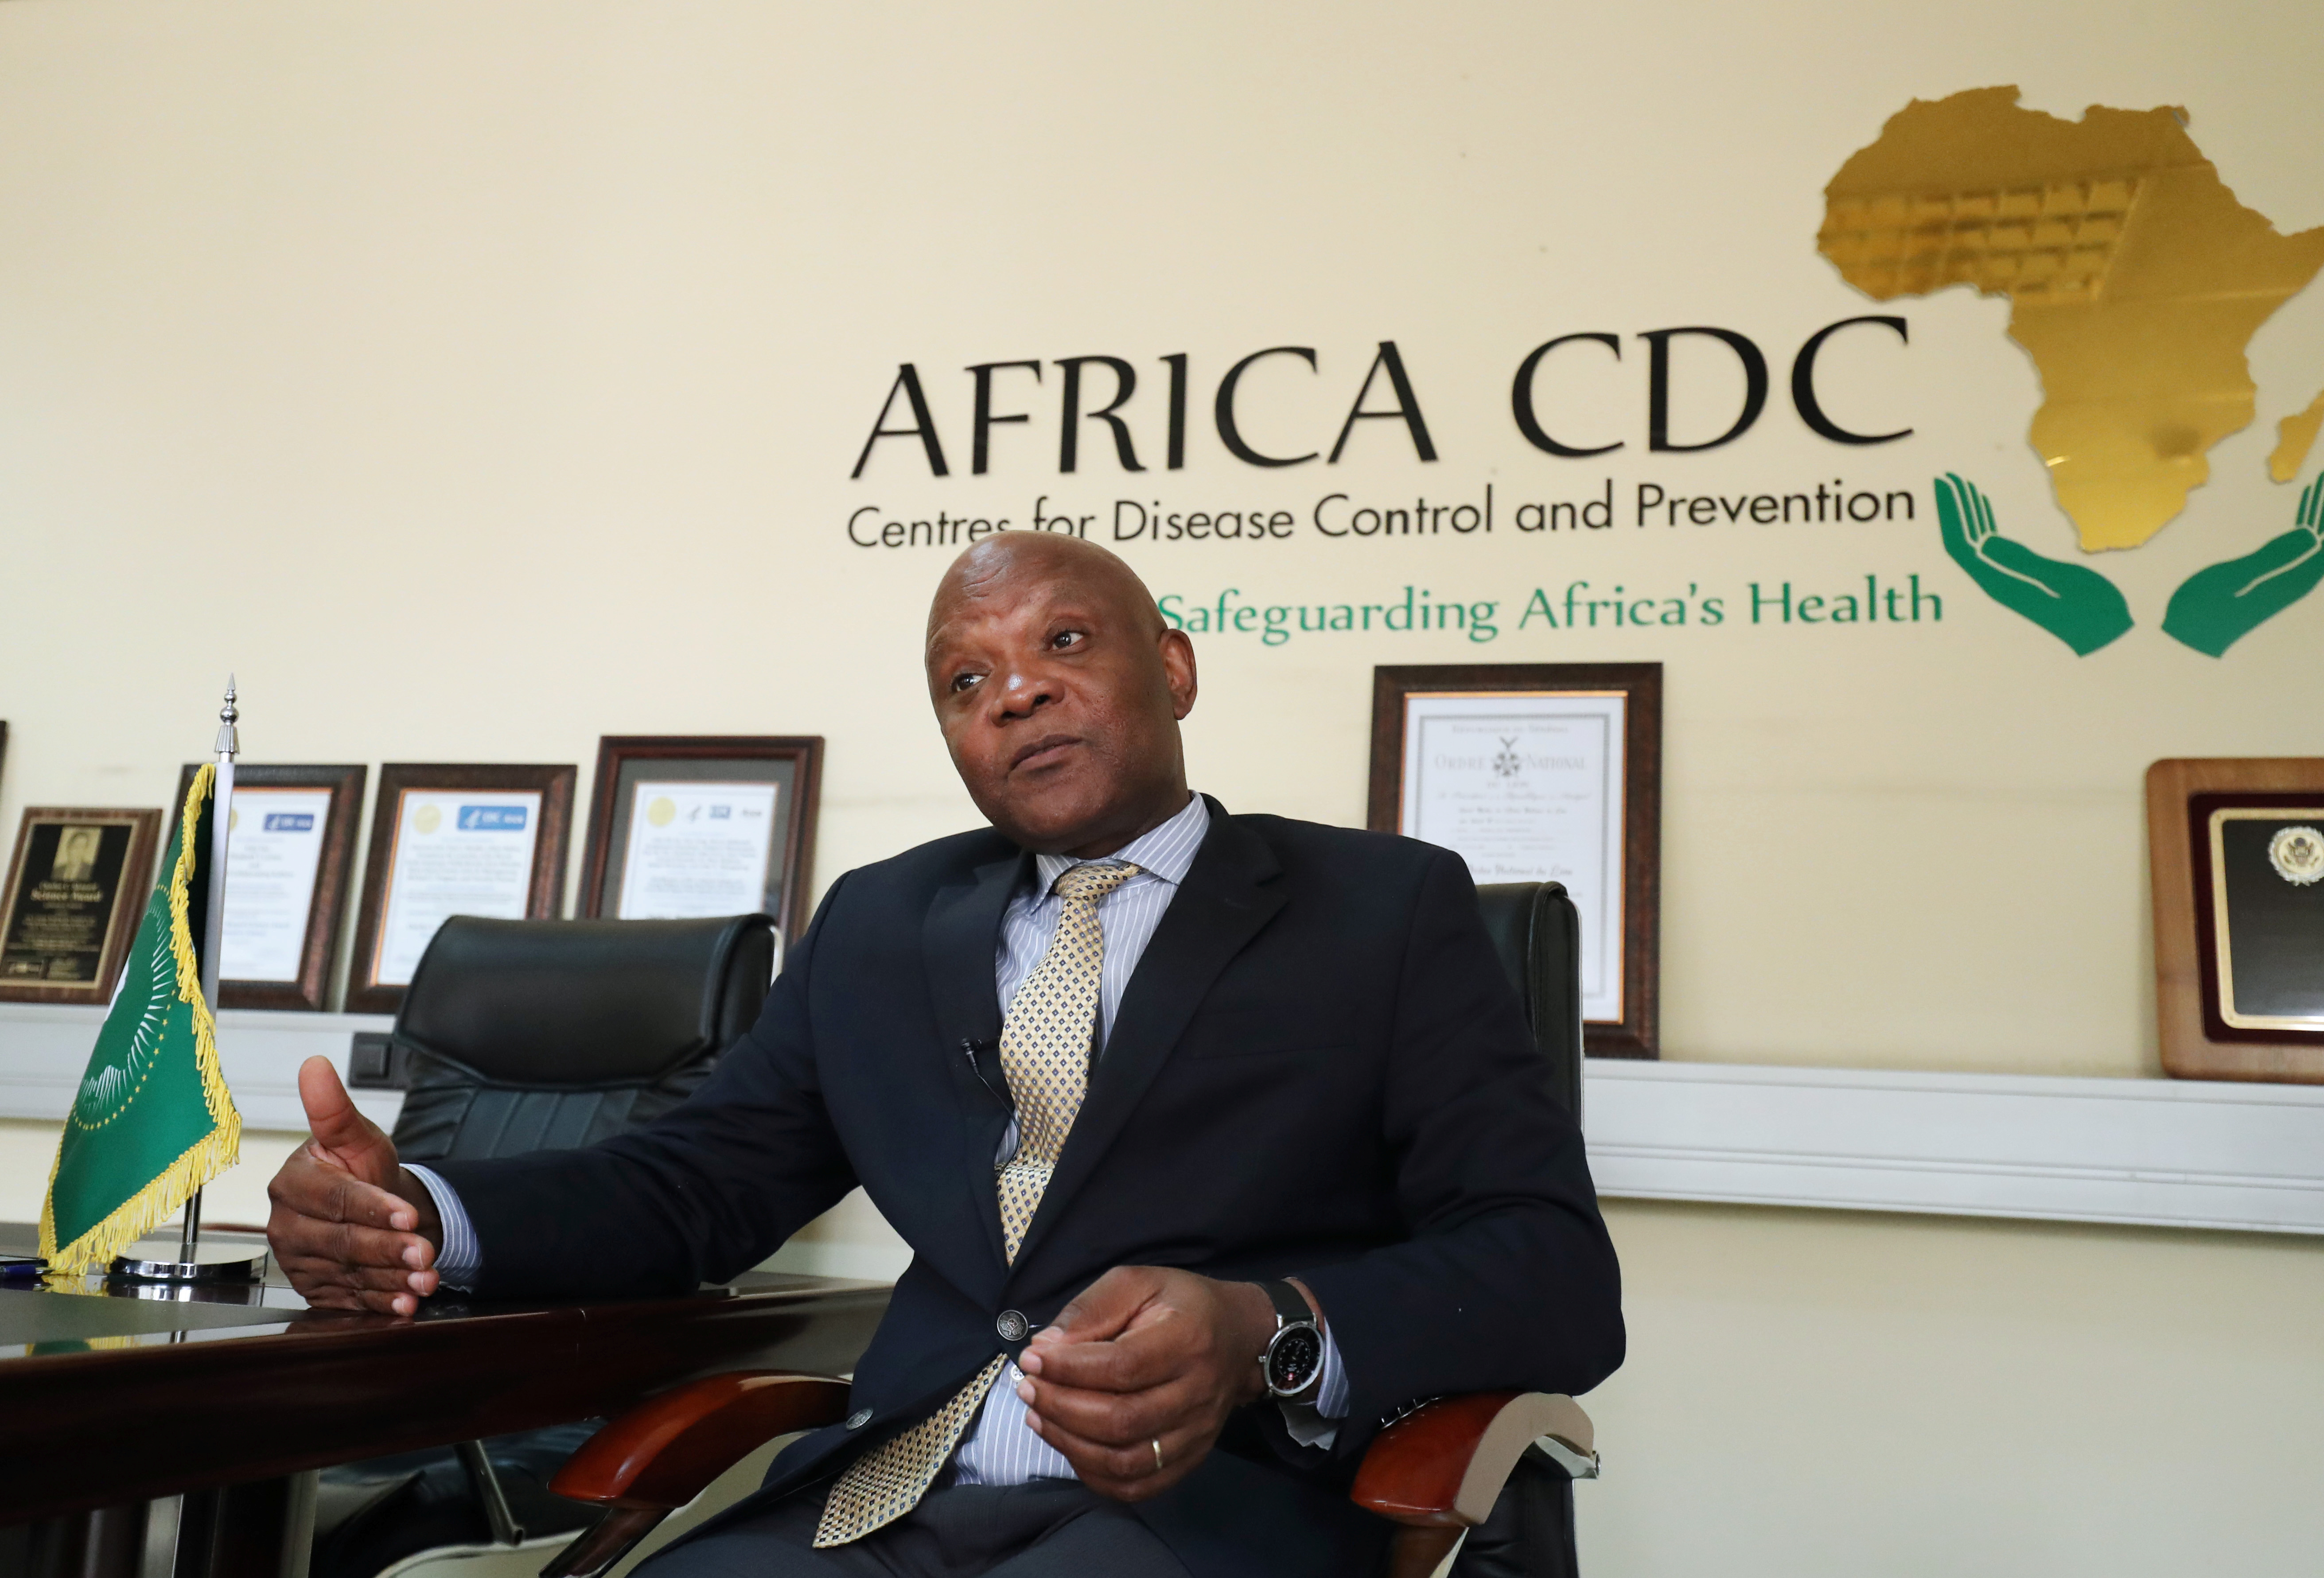 John Nkengasong, Africa's Director of the Centers for Disease Control, speaks during an interview with Reuters at the African Union Headquarters in Addis Ababa